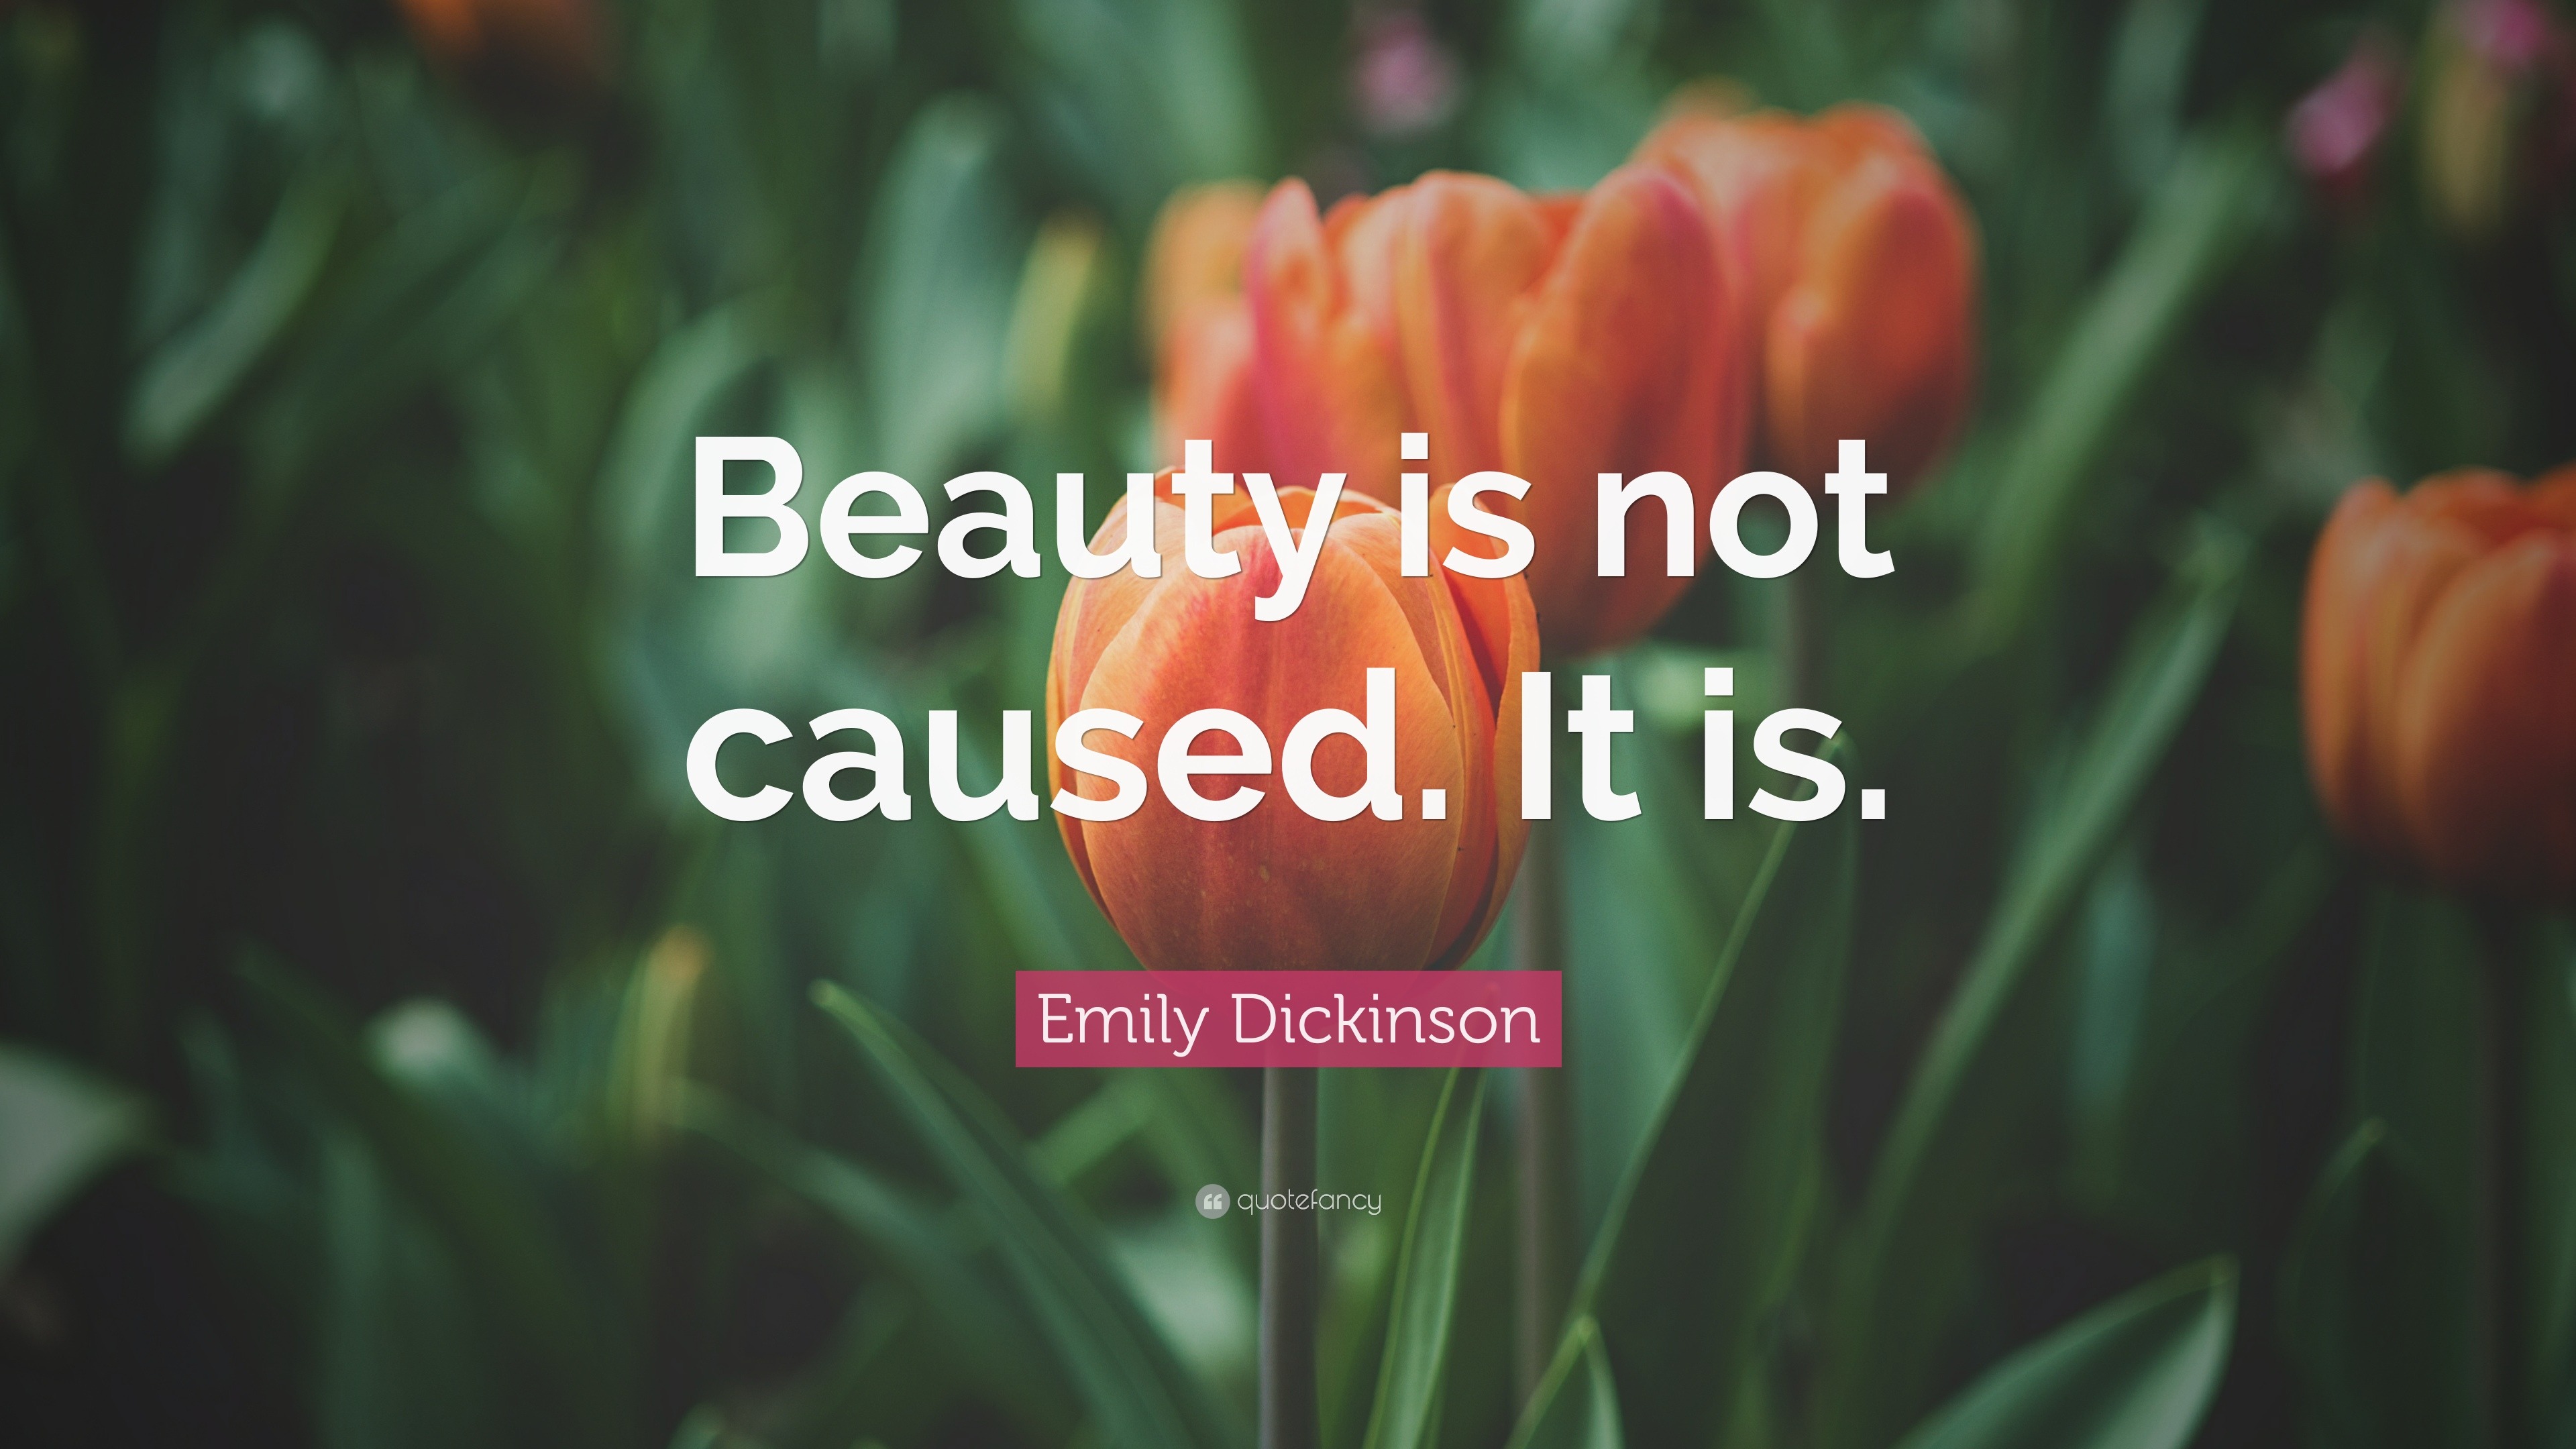 Emily Dickinson Quote: “Beauty is not caused. It is.”